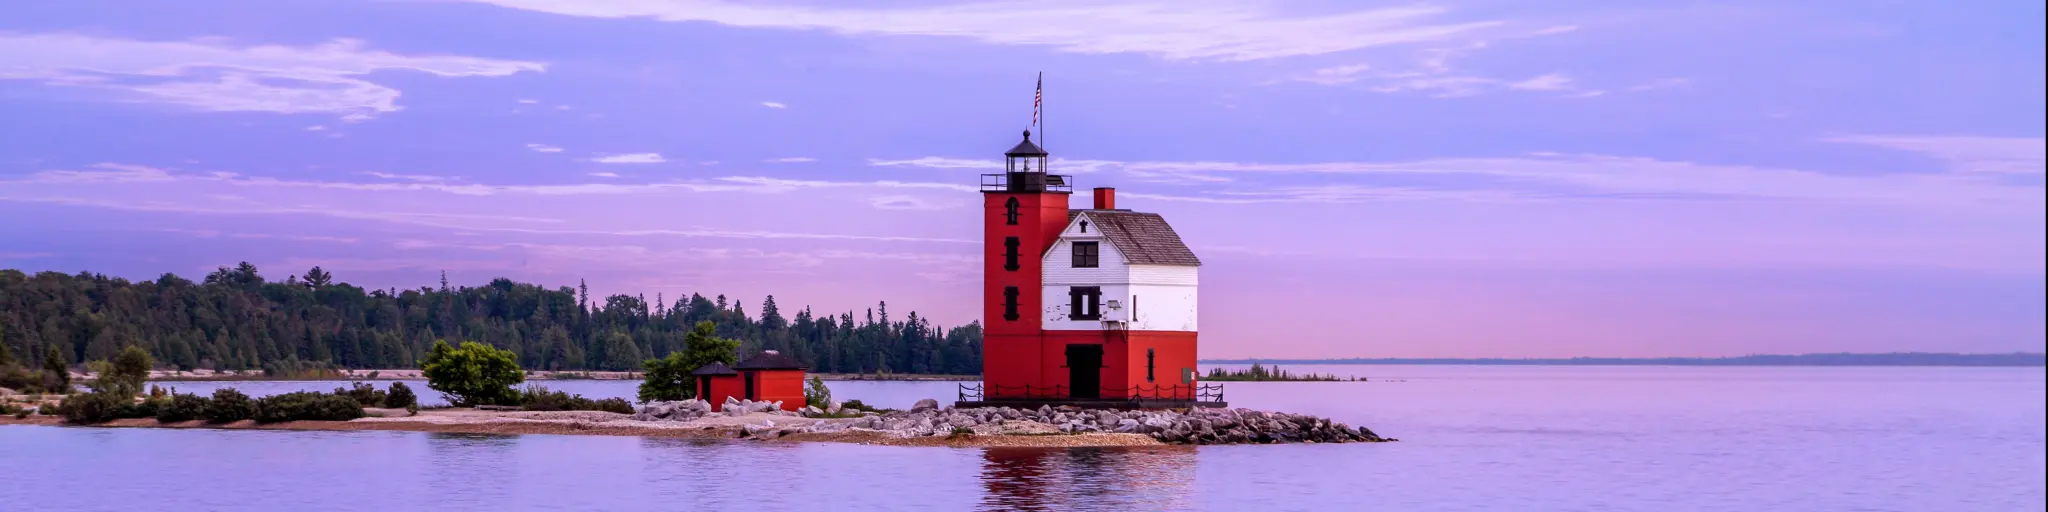 The historic Round Island Lighthouse at the shore of Mackinac Island in a purple and blue sky after sunset with a view of green pine trees at the distance